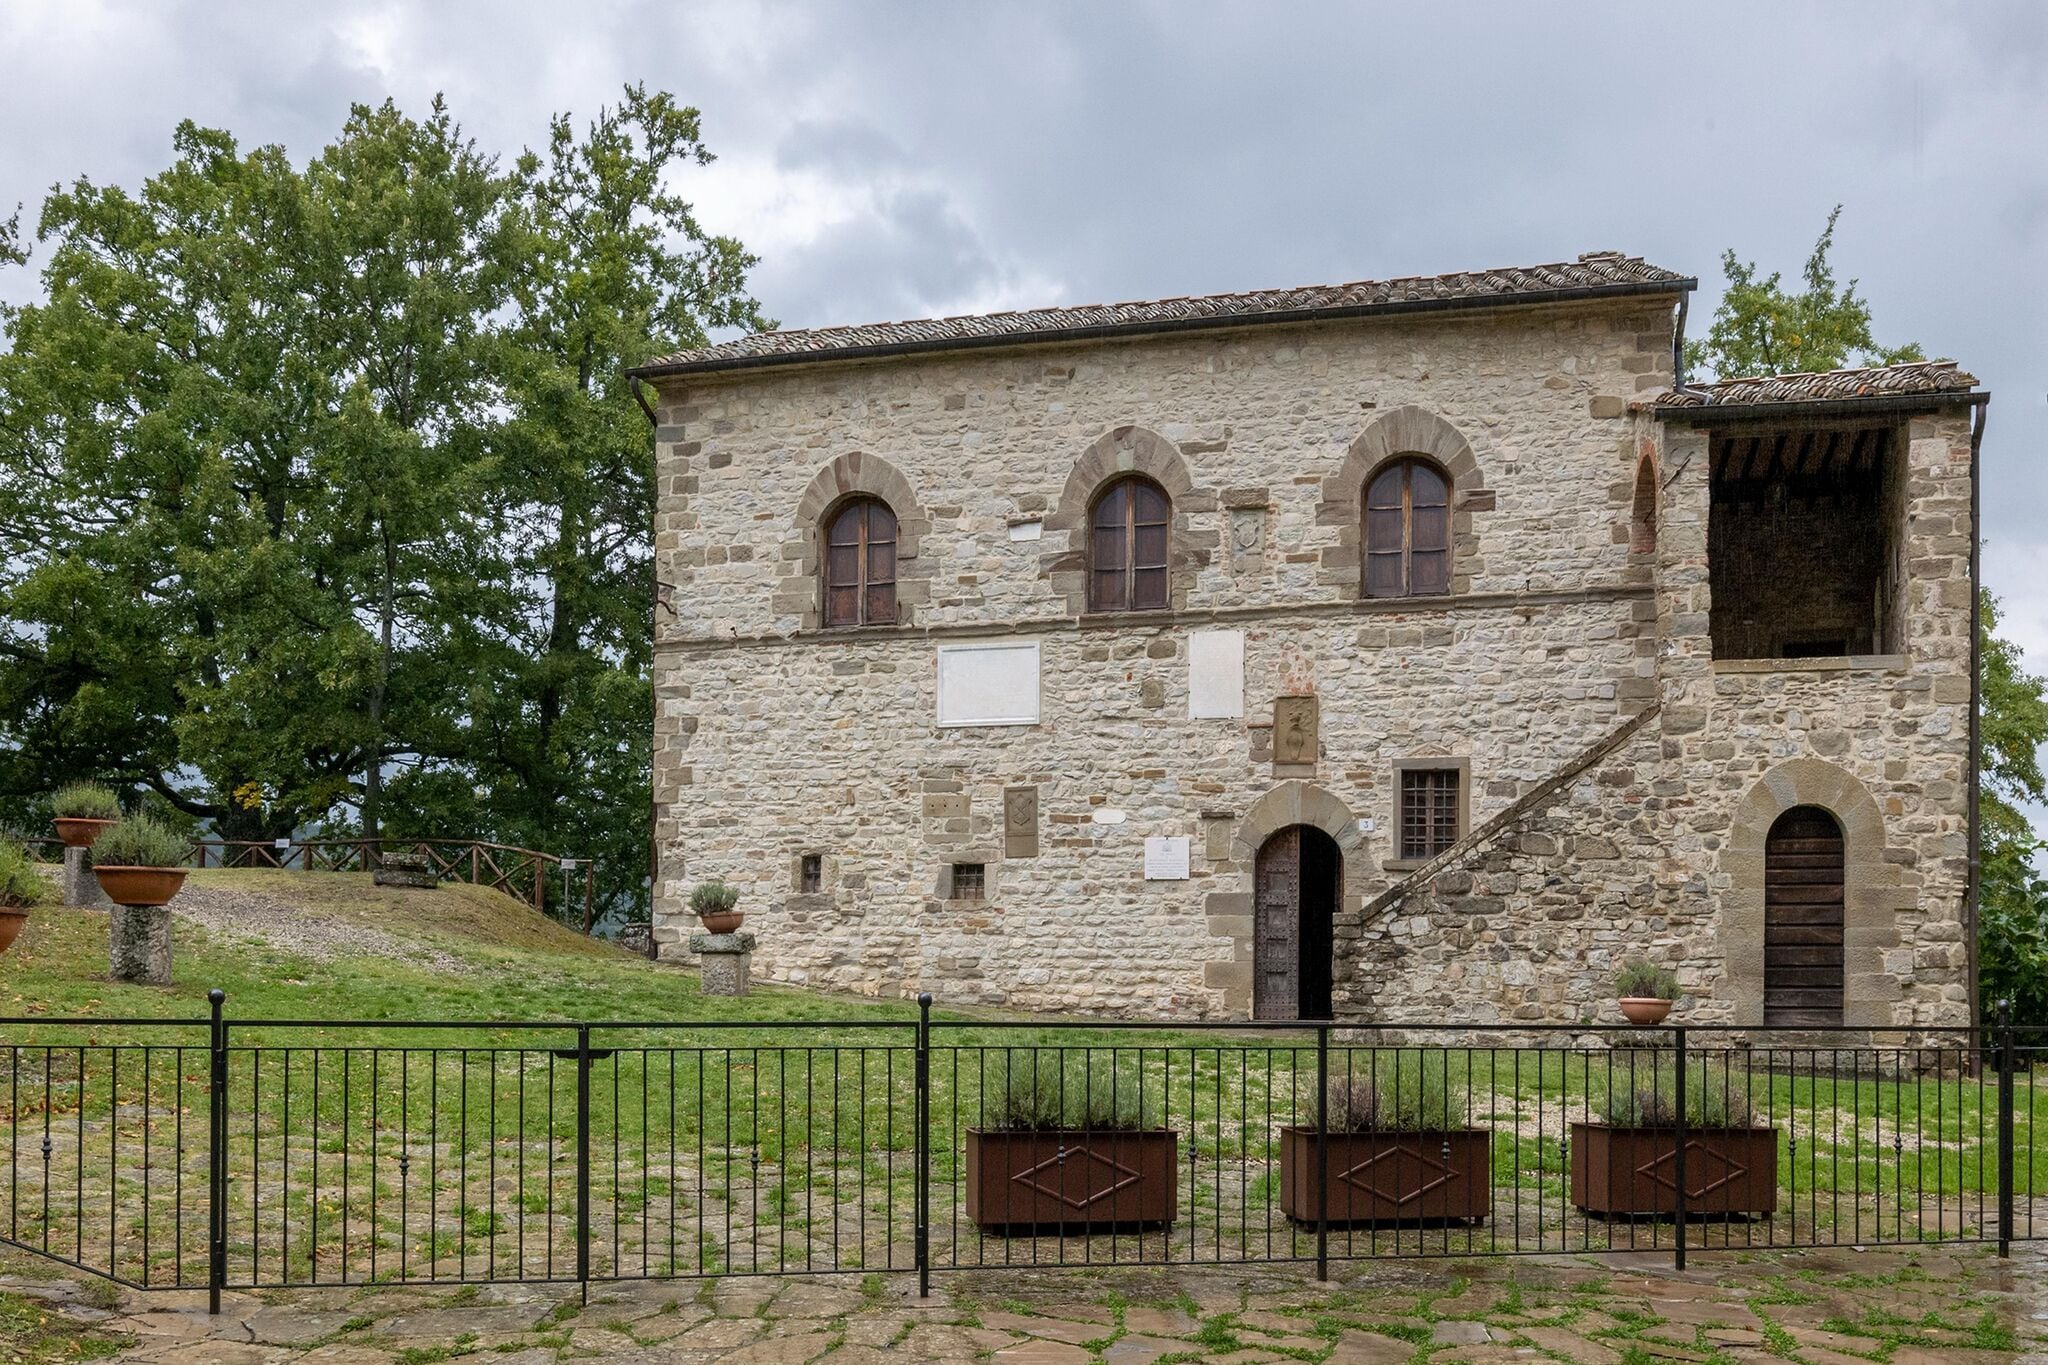 Historical Farmhouse at the foot of the Apennines in Tuscany